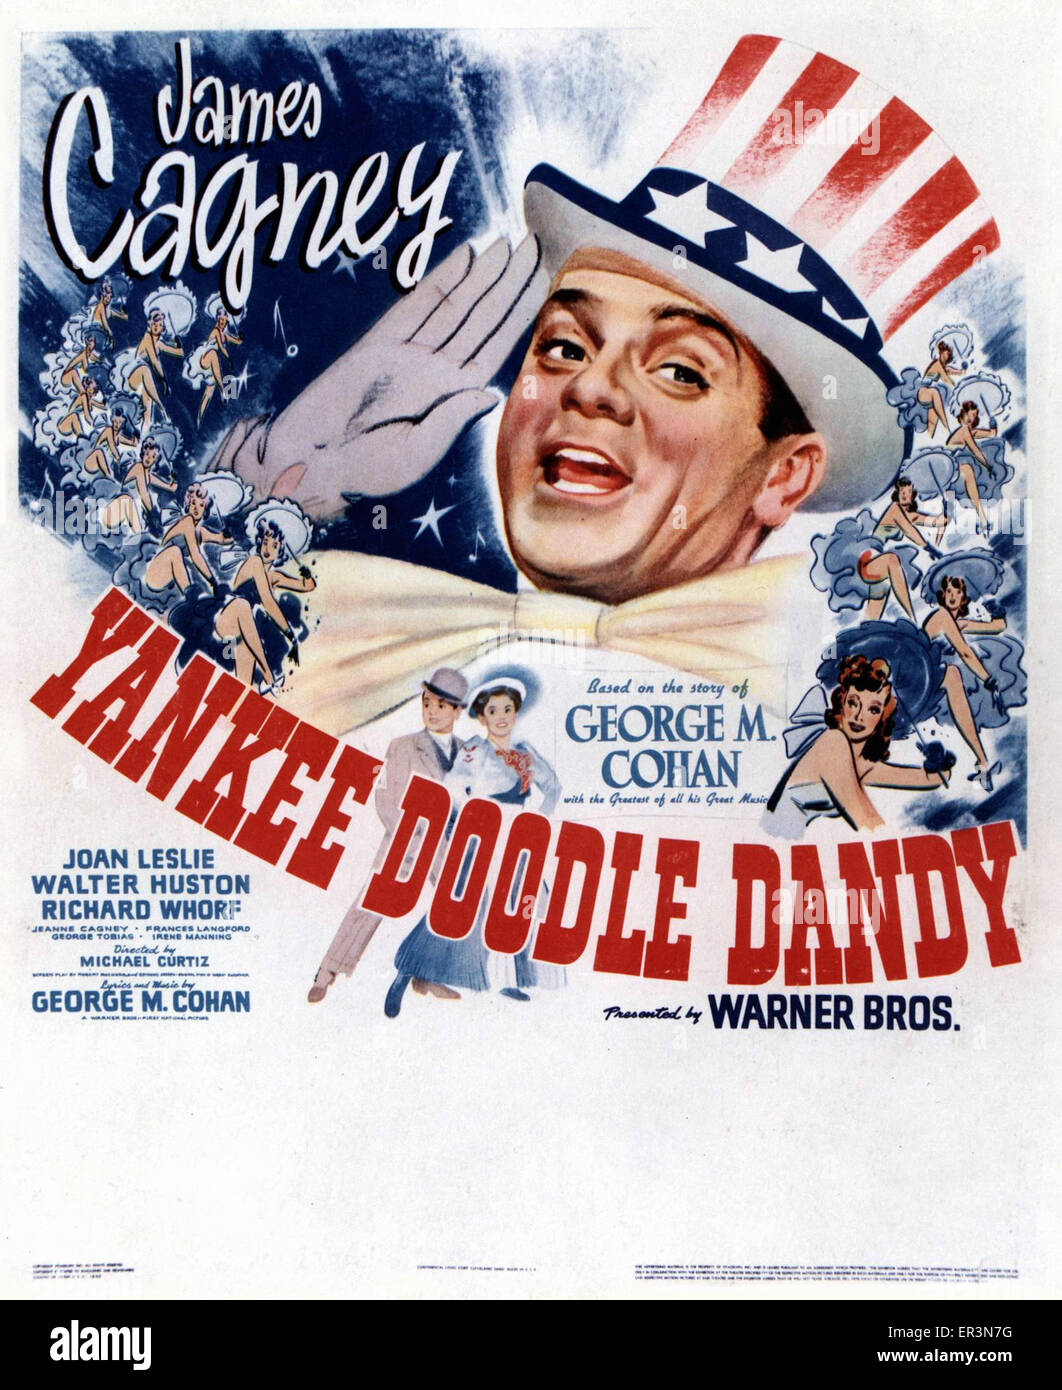 Yankee Doodle Dandy - Movie Poster Stock Photo